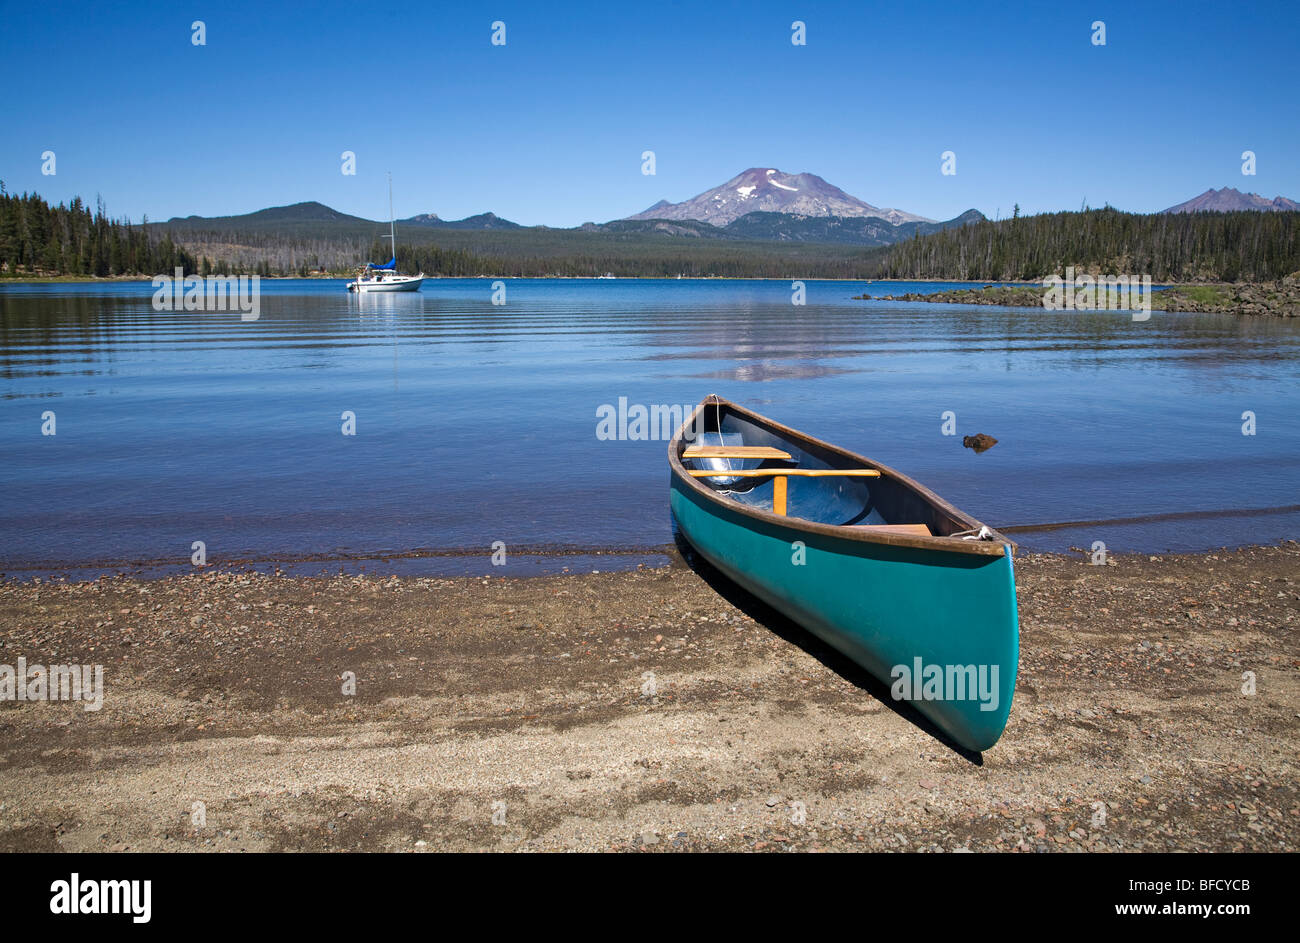 A canoe and a sailboat on Elk Lake in the Oregon Cascade Mountains along the Cascade Lakes Highway Stock Photo